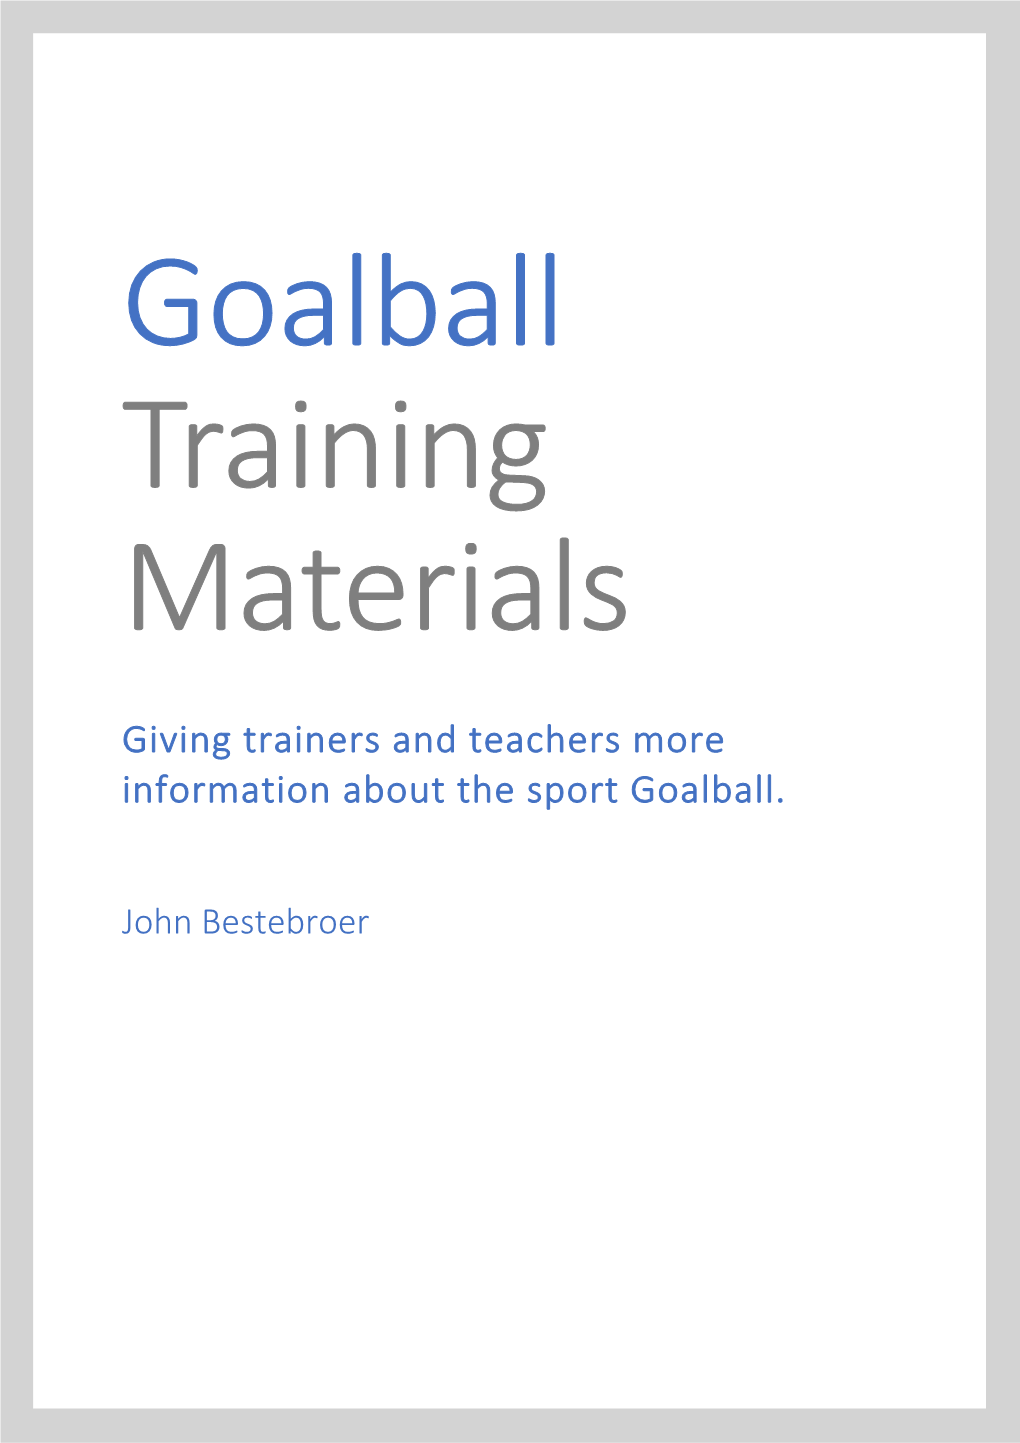 Giving Trainers and Teachers More Information About the Sport Goalball